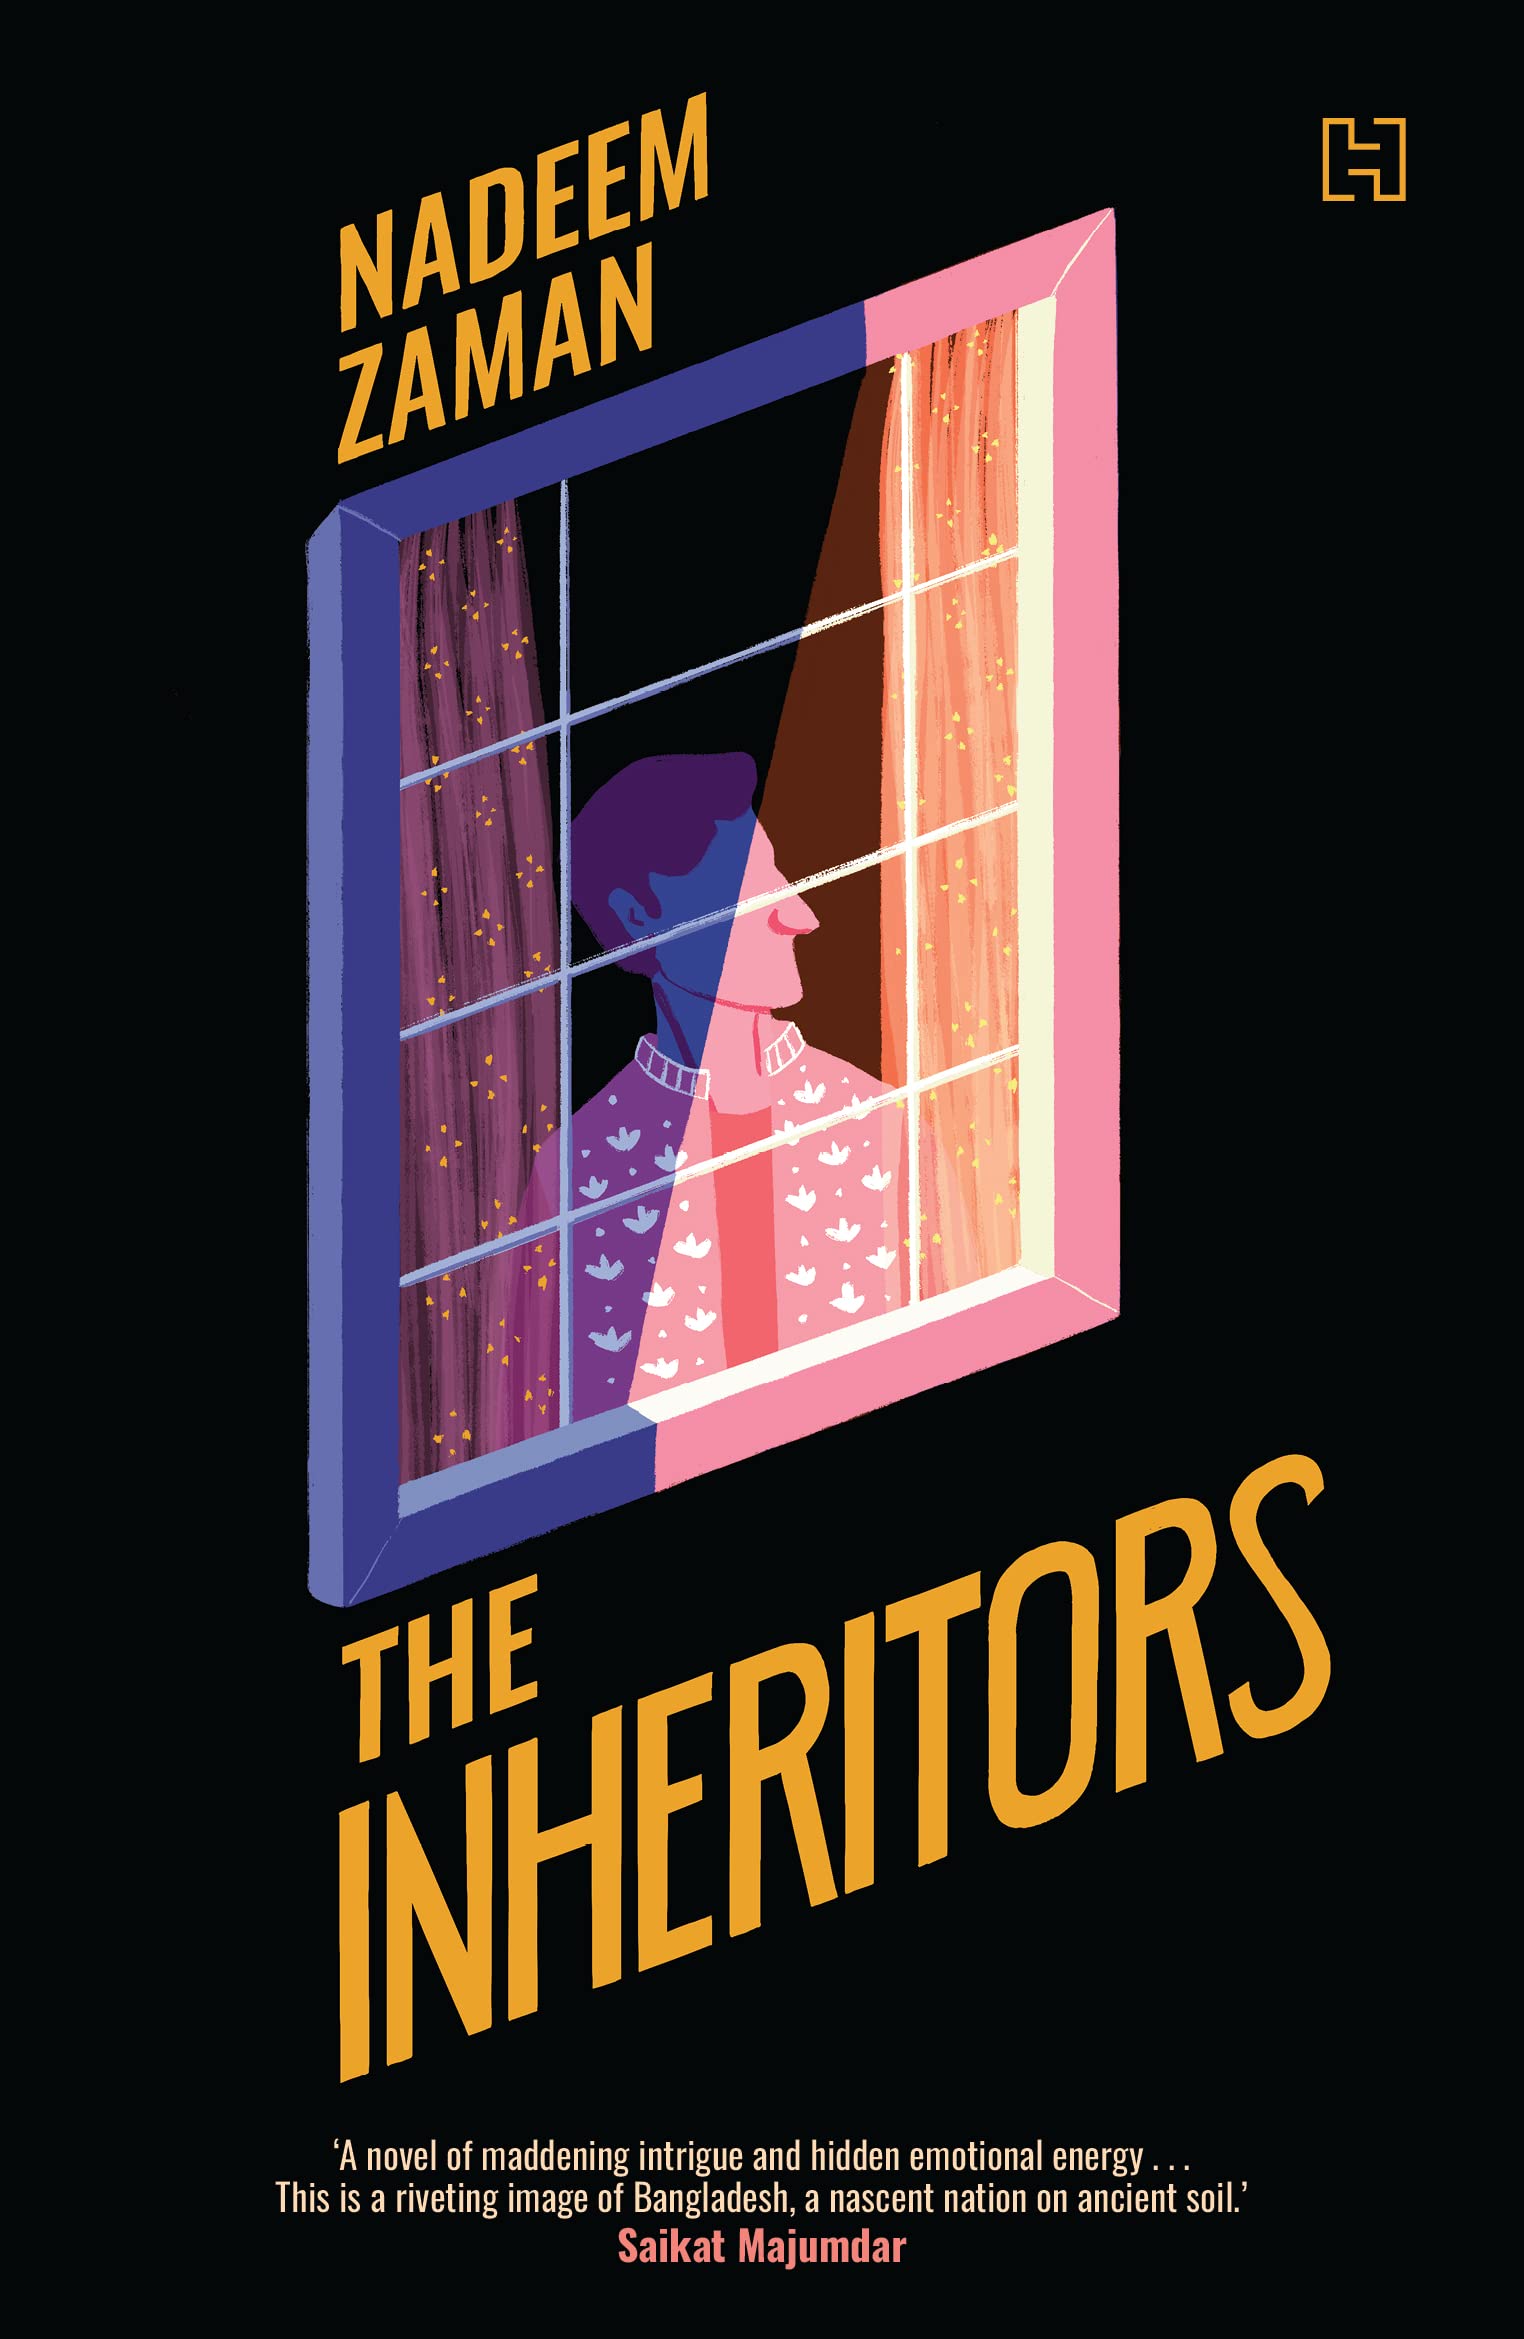 "The Inheritors": In this novel, Nadeem Zaman paints a rich portrait of Dhaka and its people in the clutch of stupefying change